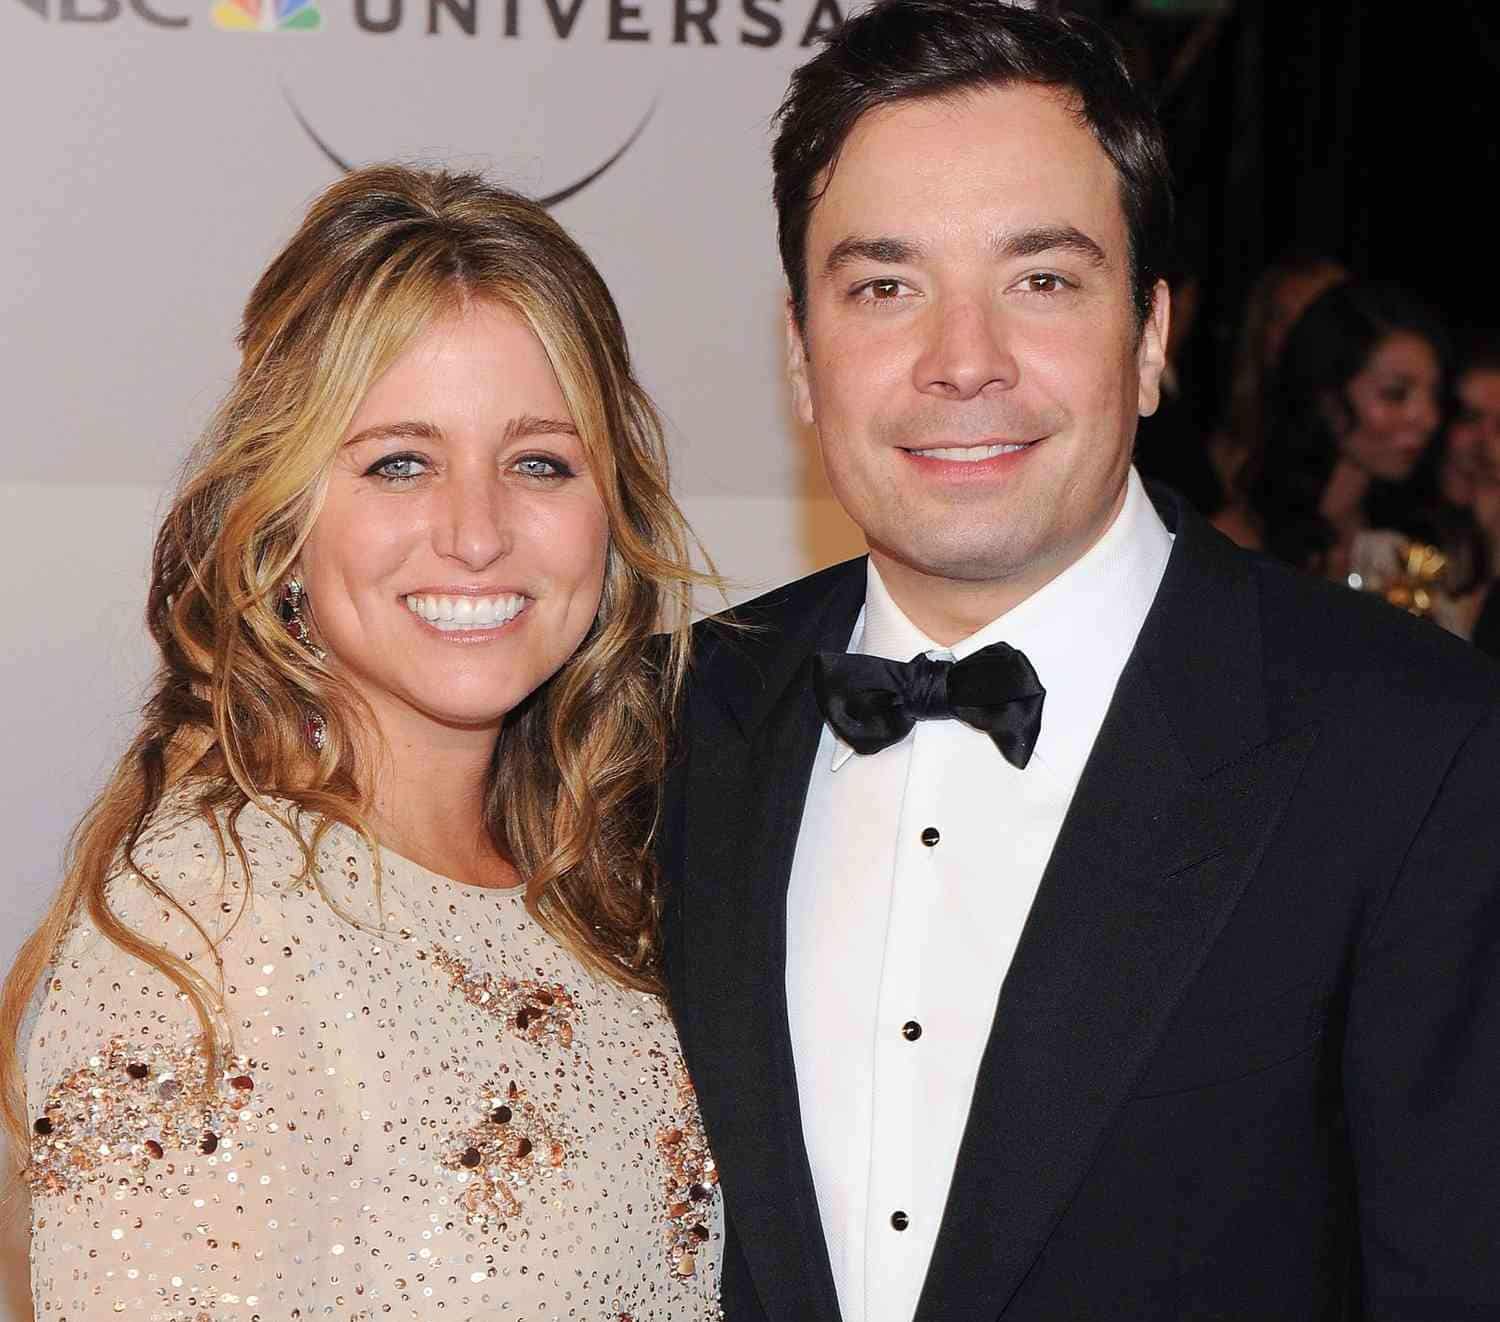 Jimmy Fallon tied the knot with Nancy Juvonen in 2007